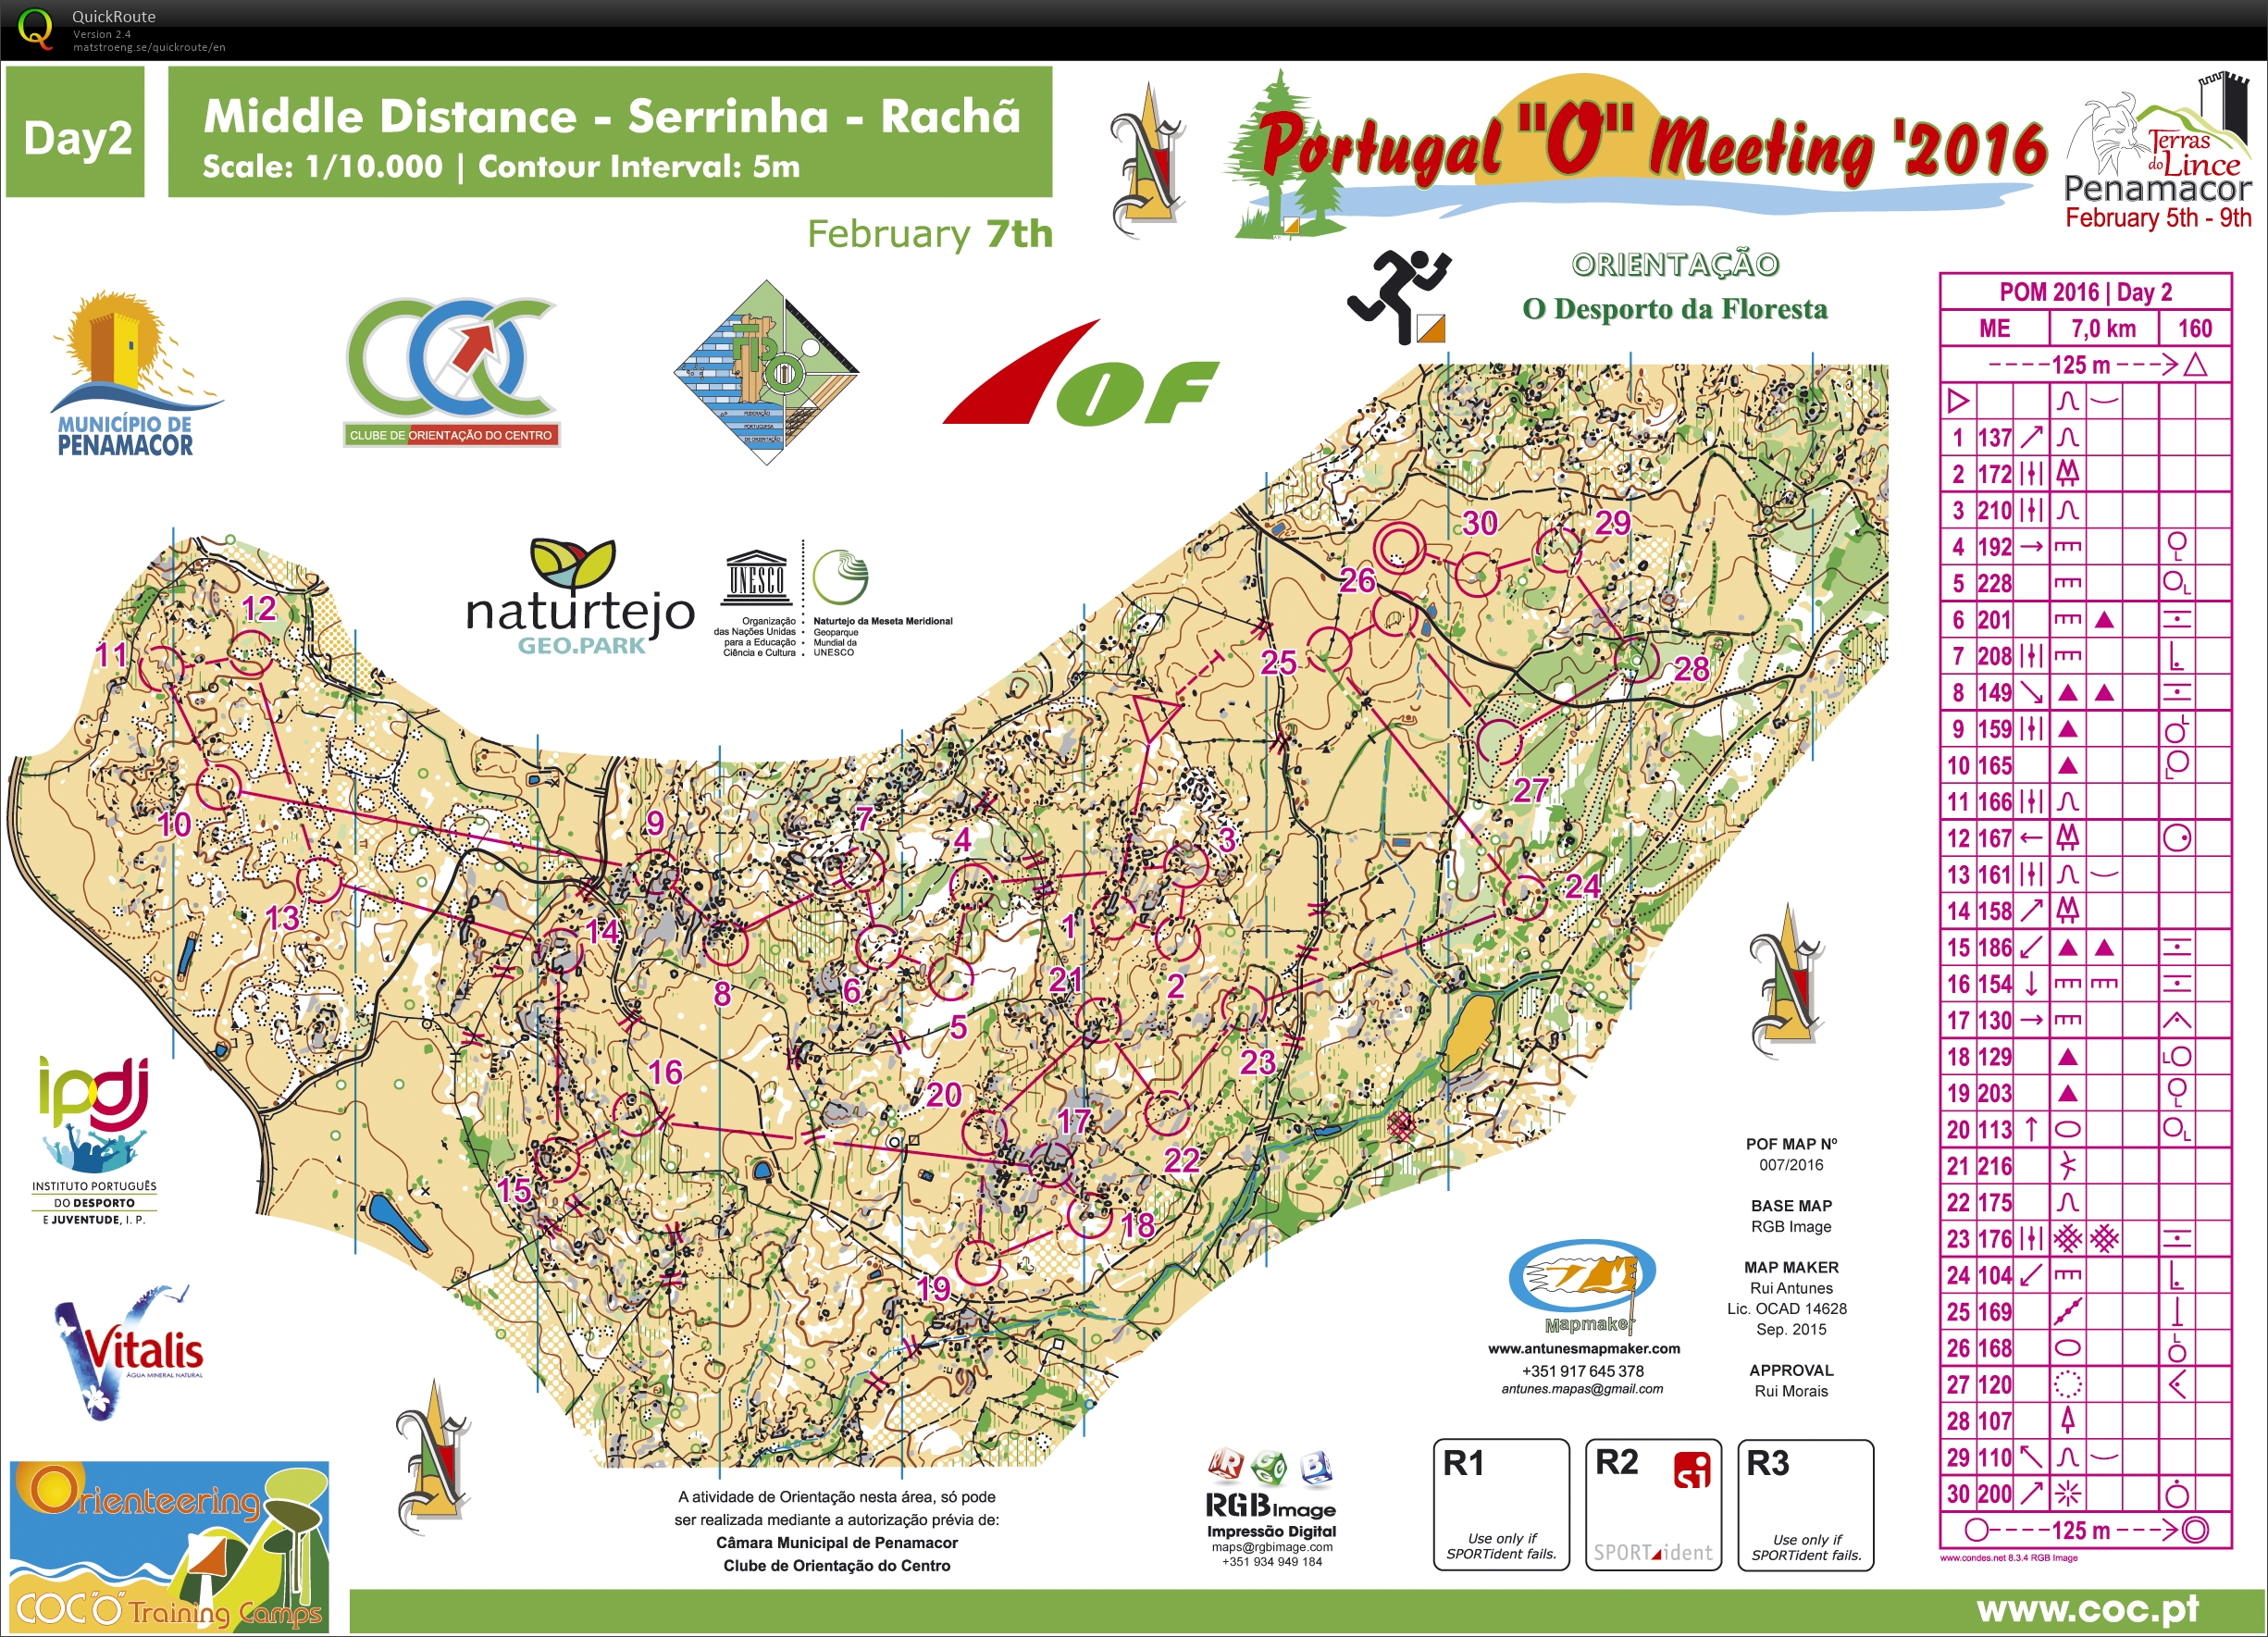 Portugal O Meeting Stage 2 (07-02-2016)